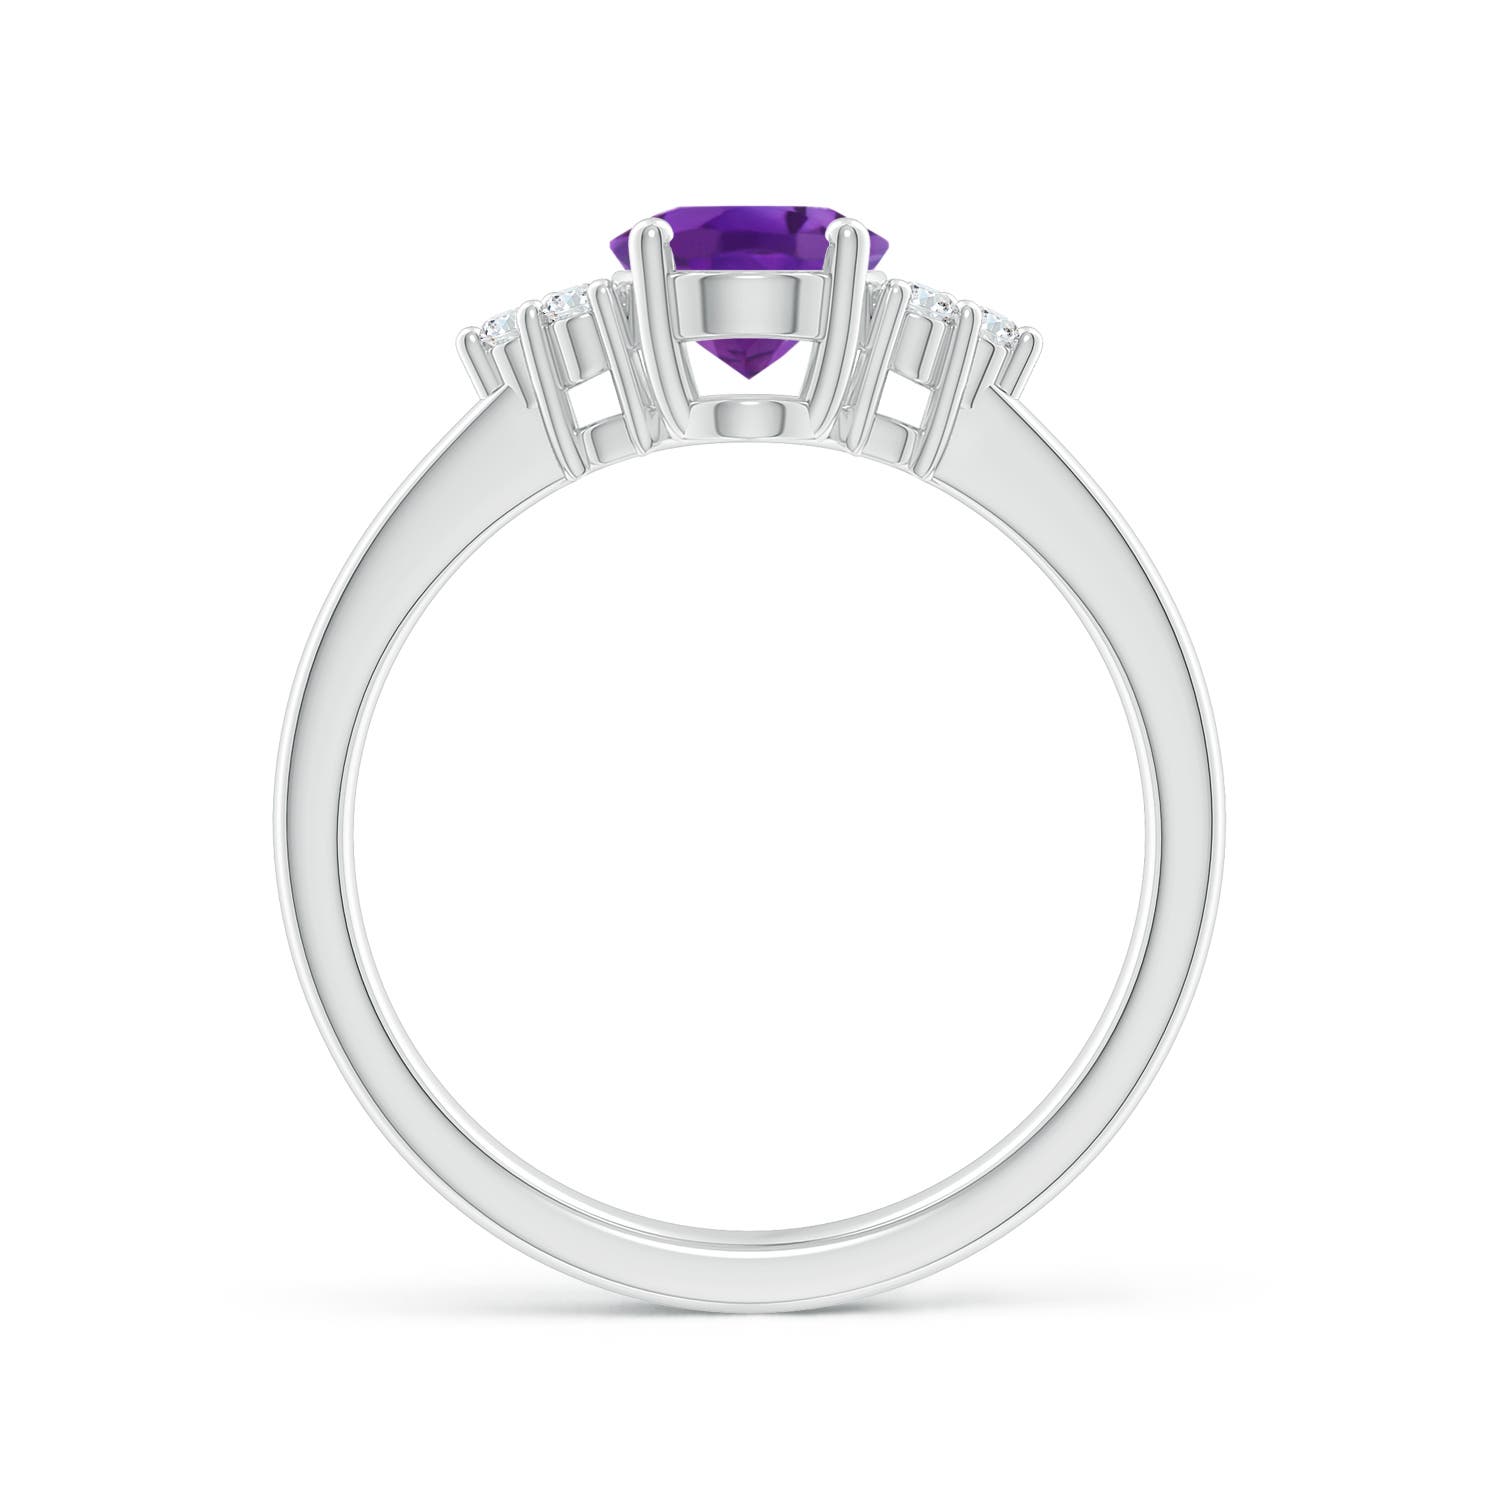 AAA - Amethyst / 1.26 CT / 14 KT White Gold